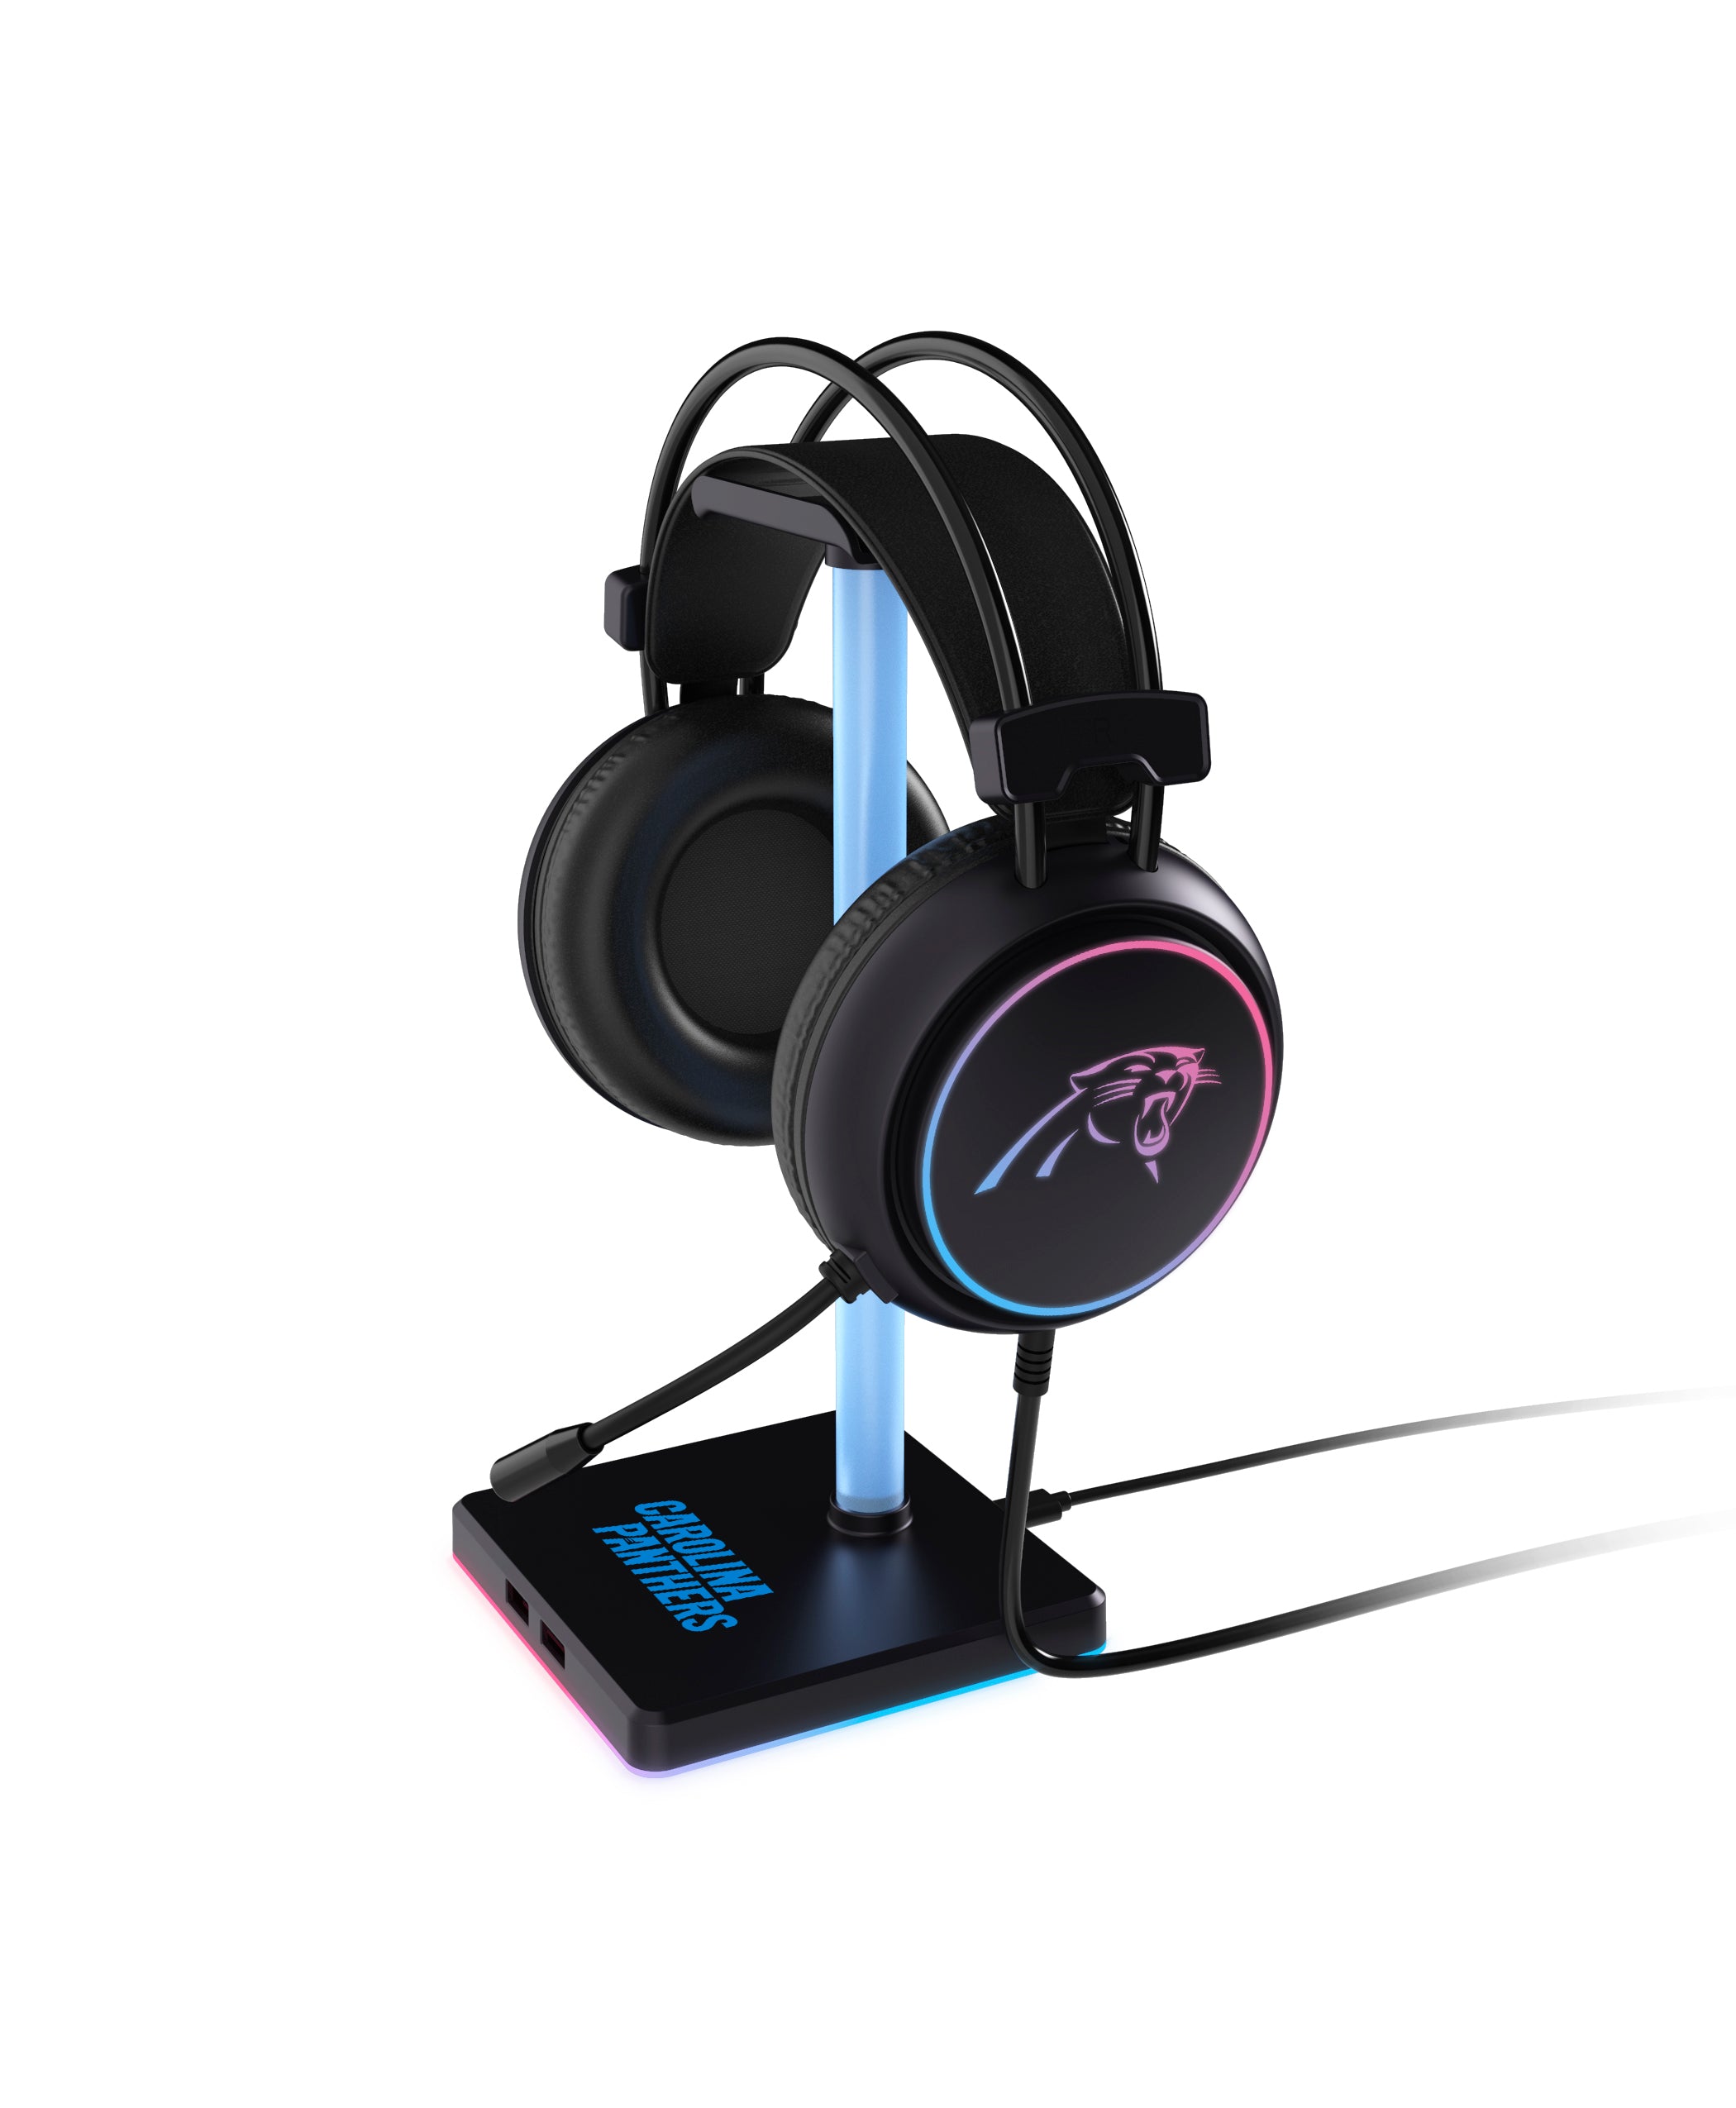 NFL LED Gaming Headset and Stand